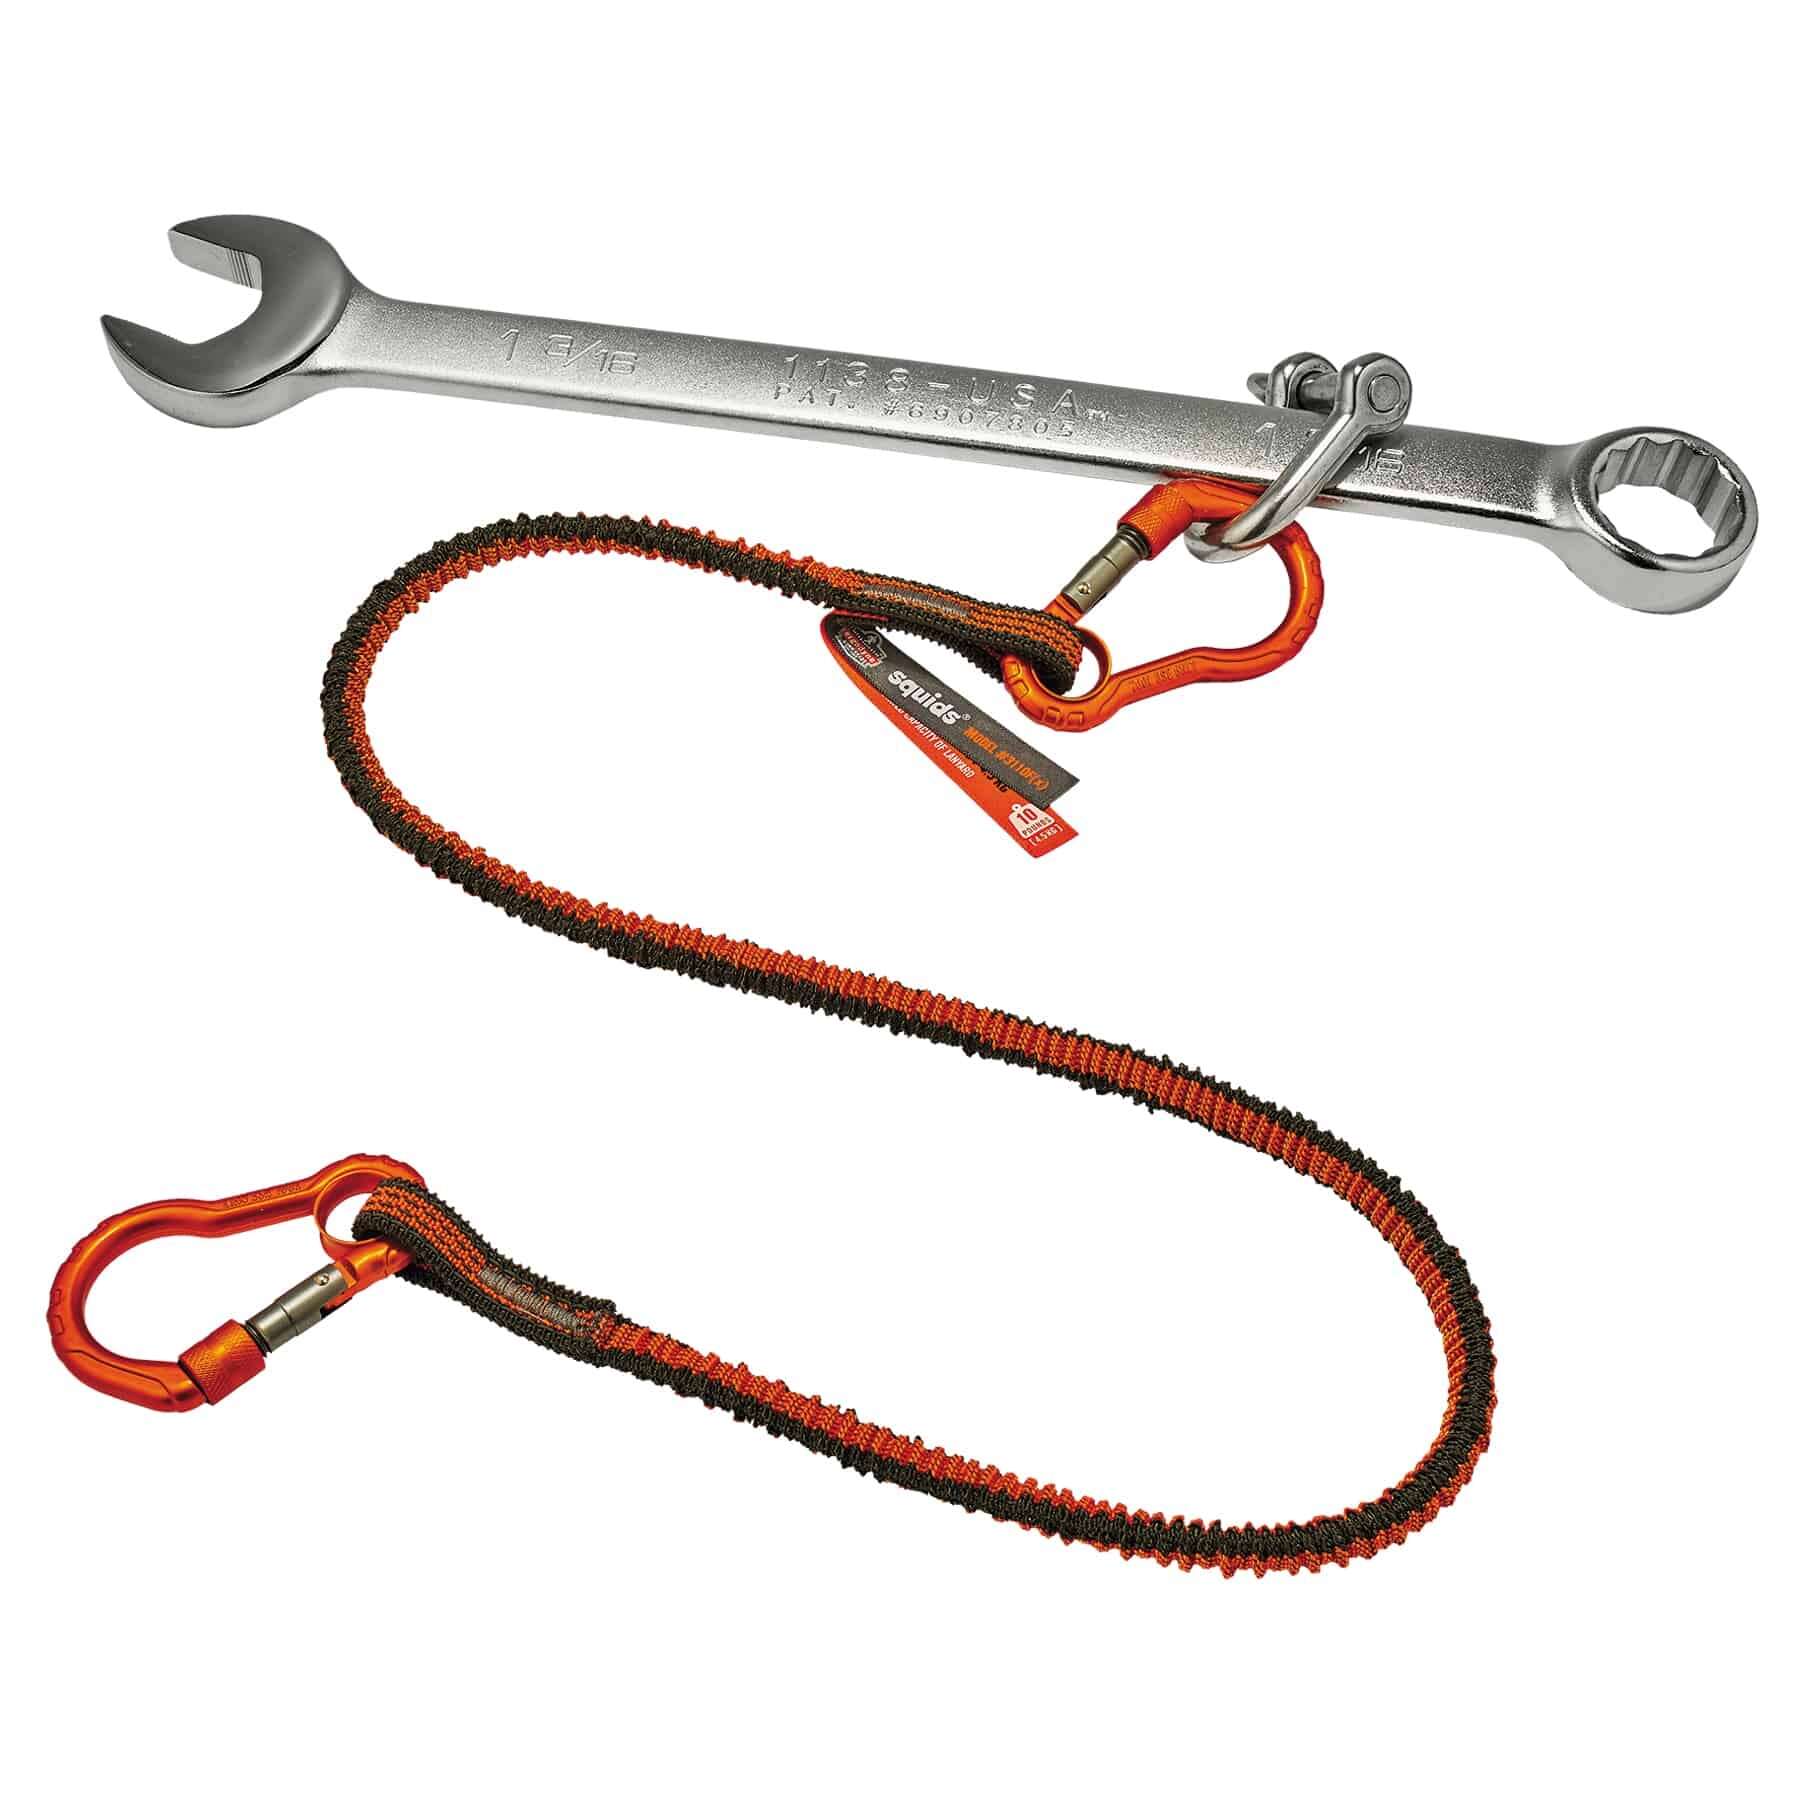 WITH CARABINER SECURE Retractable For Key Heavy Duty Pliers Fishing Lanyard  $11.37 - PicClick AU